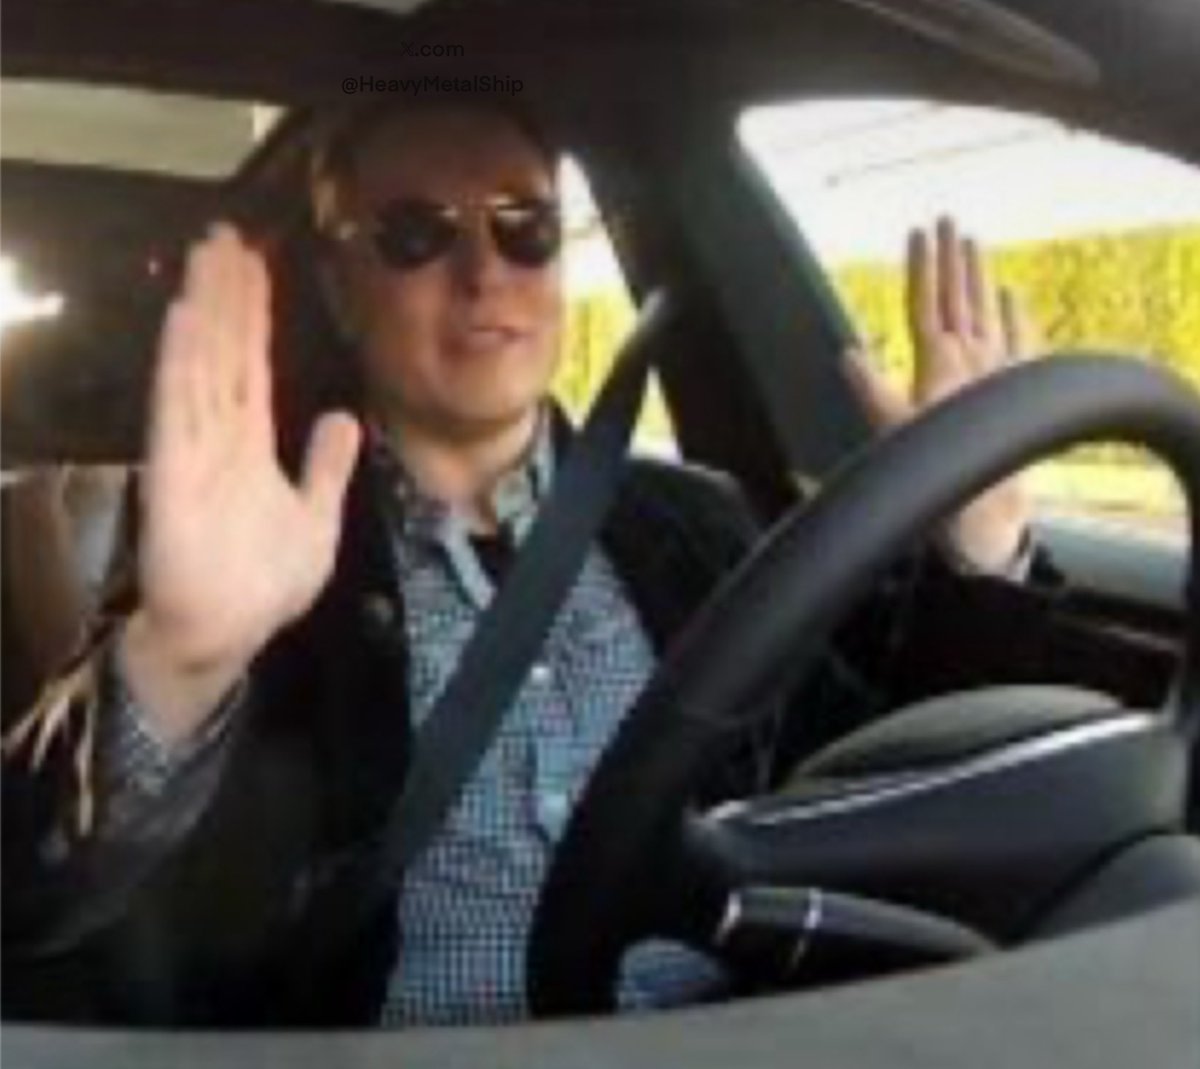 Elon: “Look mom! No hands!” Would you like to ride with Elon in his self driving Tesla?